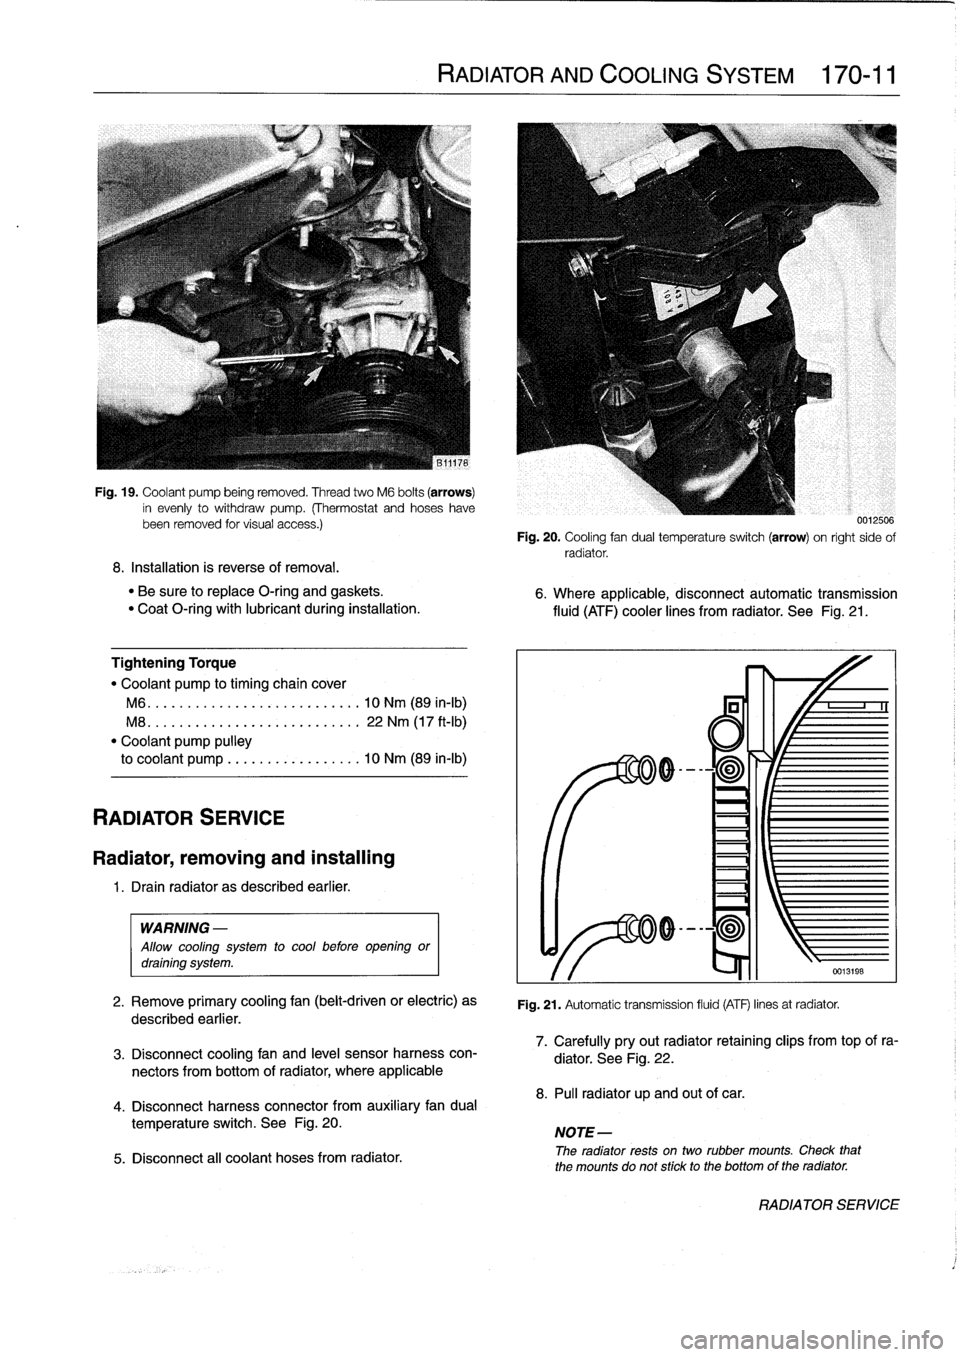 BMW 325i 1994 E36 Owners Manual 
Fig
.
19
.
Coolant
pump
being
removed
.
Thread
two
M6
bolts
(arrows)
in
evenly
to
withdraw
pump
.
(Thermostat
and
hoseshavebeen
removed
tor
visual
access
.)

8
.
Installation
is
reverse
of
removal
.
